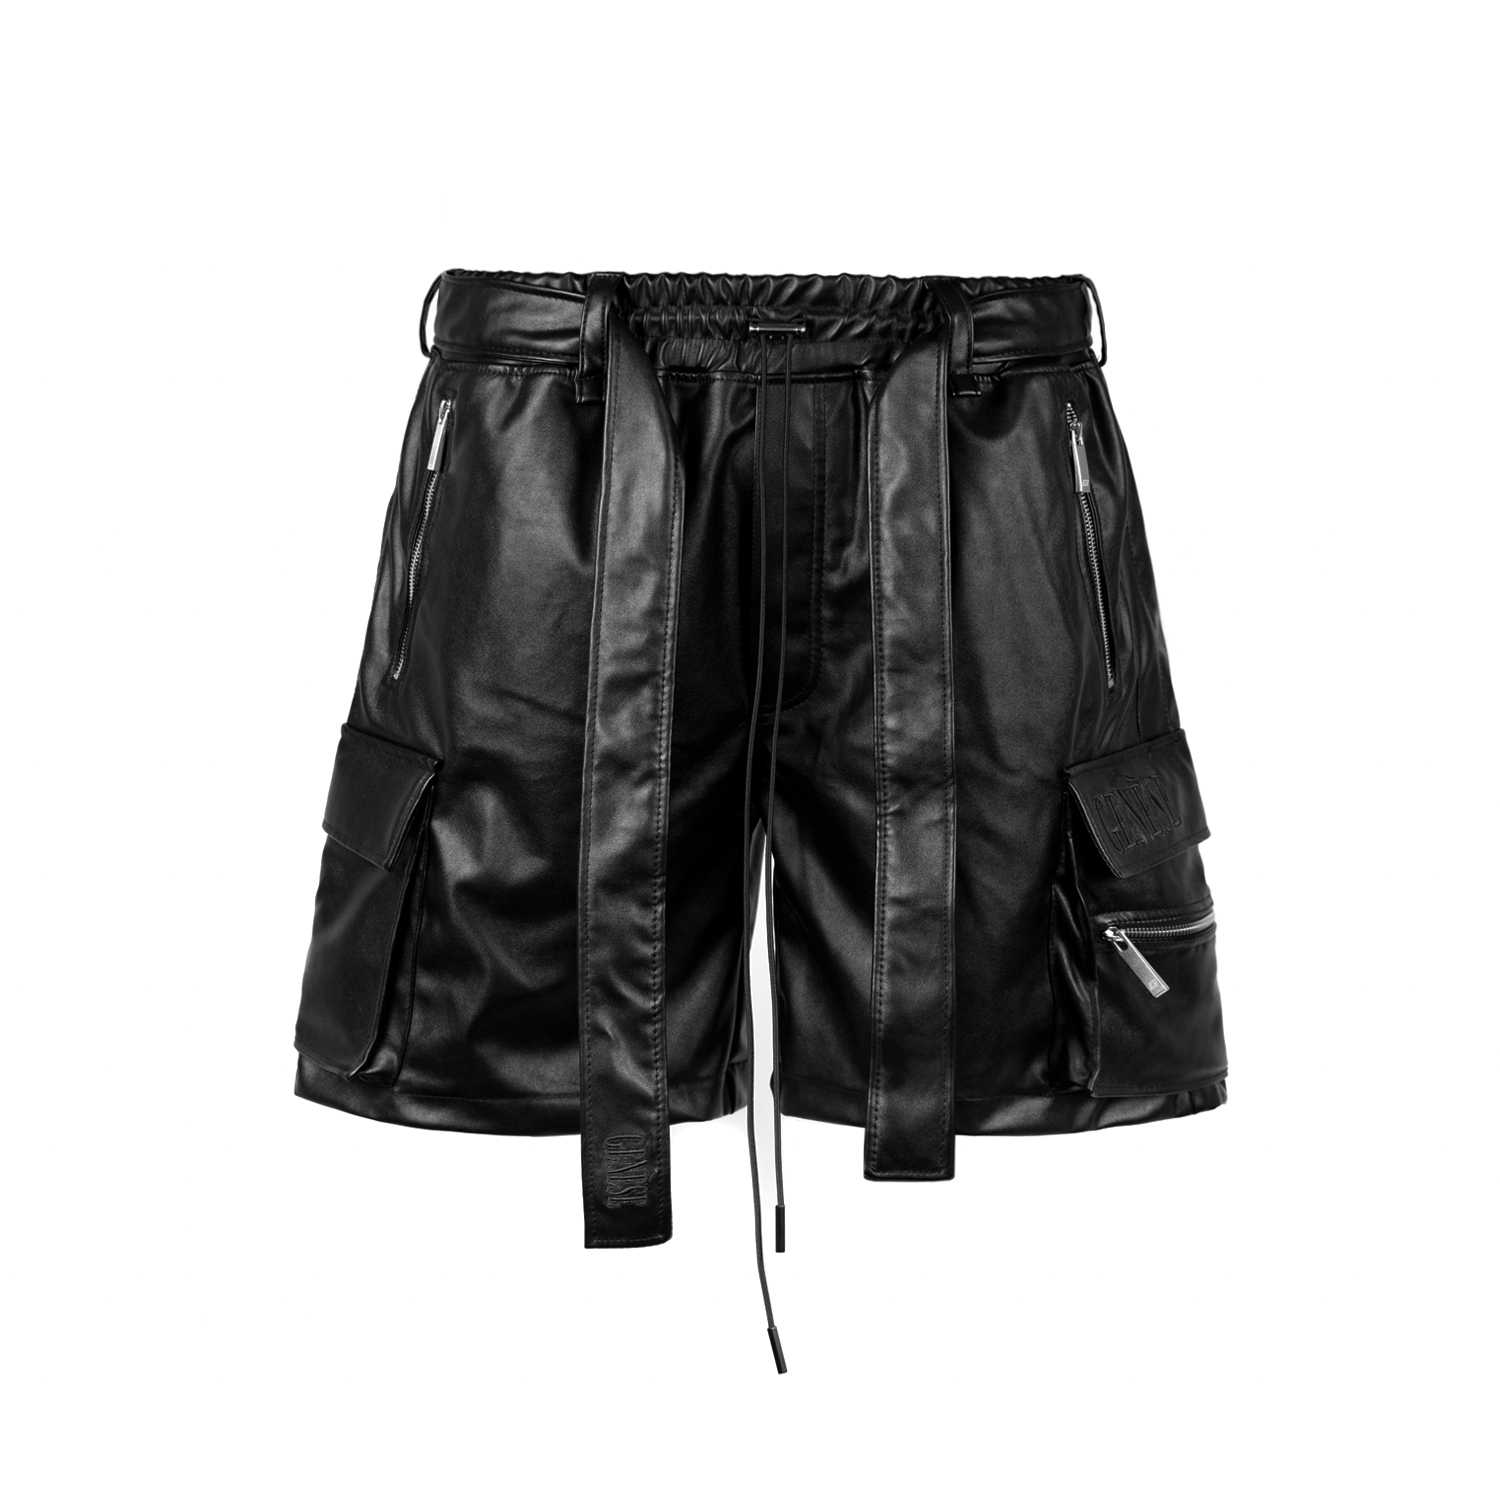 leather_black_panther_shorts_1500x1500_01.1